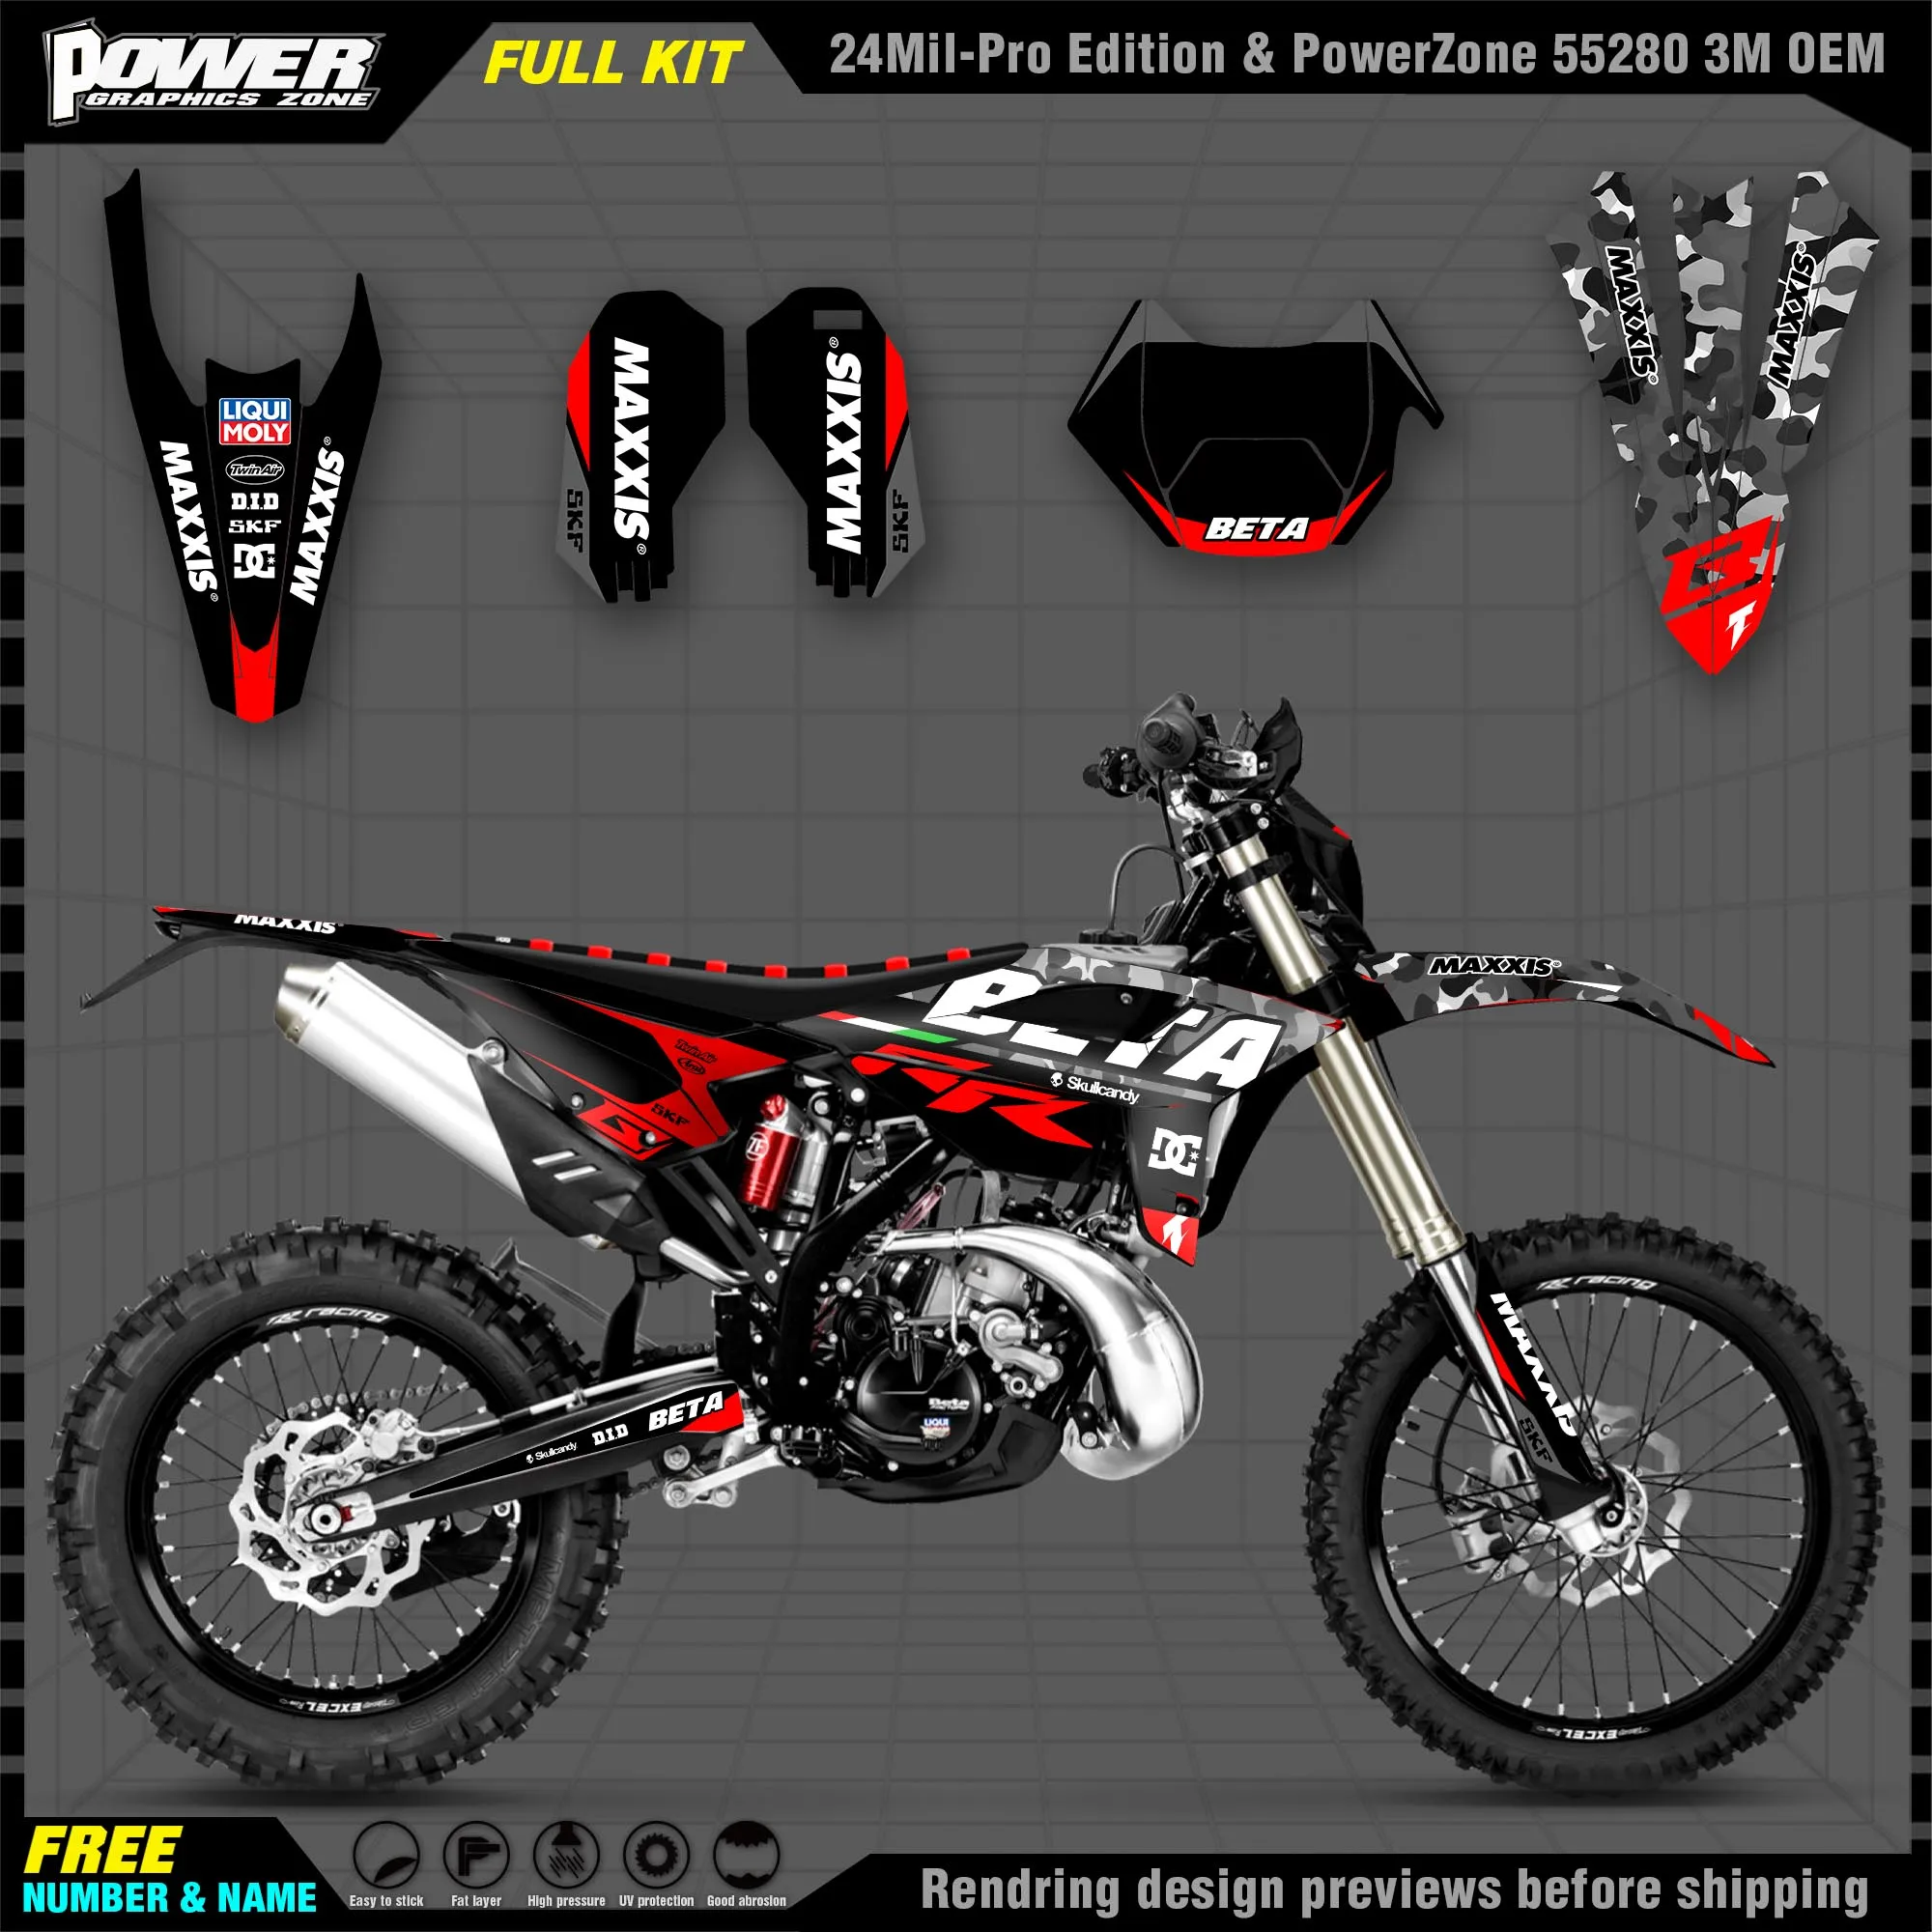 PowerZone Custom Team Graphic Decal & Sticker Kit For BETA 2020 2021 2022 RR RR-S 125 200 250 300RR 350 390 430 480 RR-S RX 013